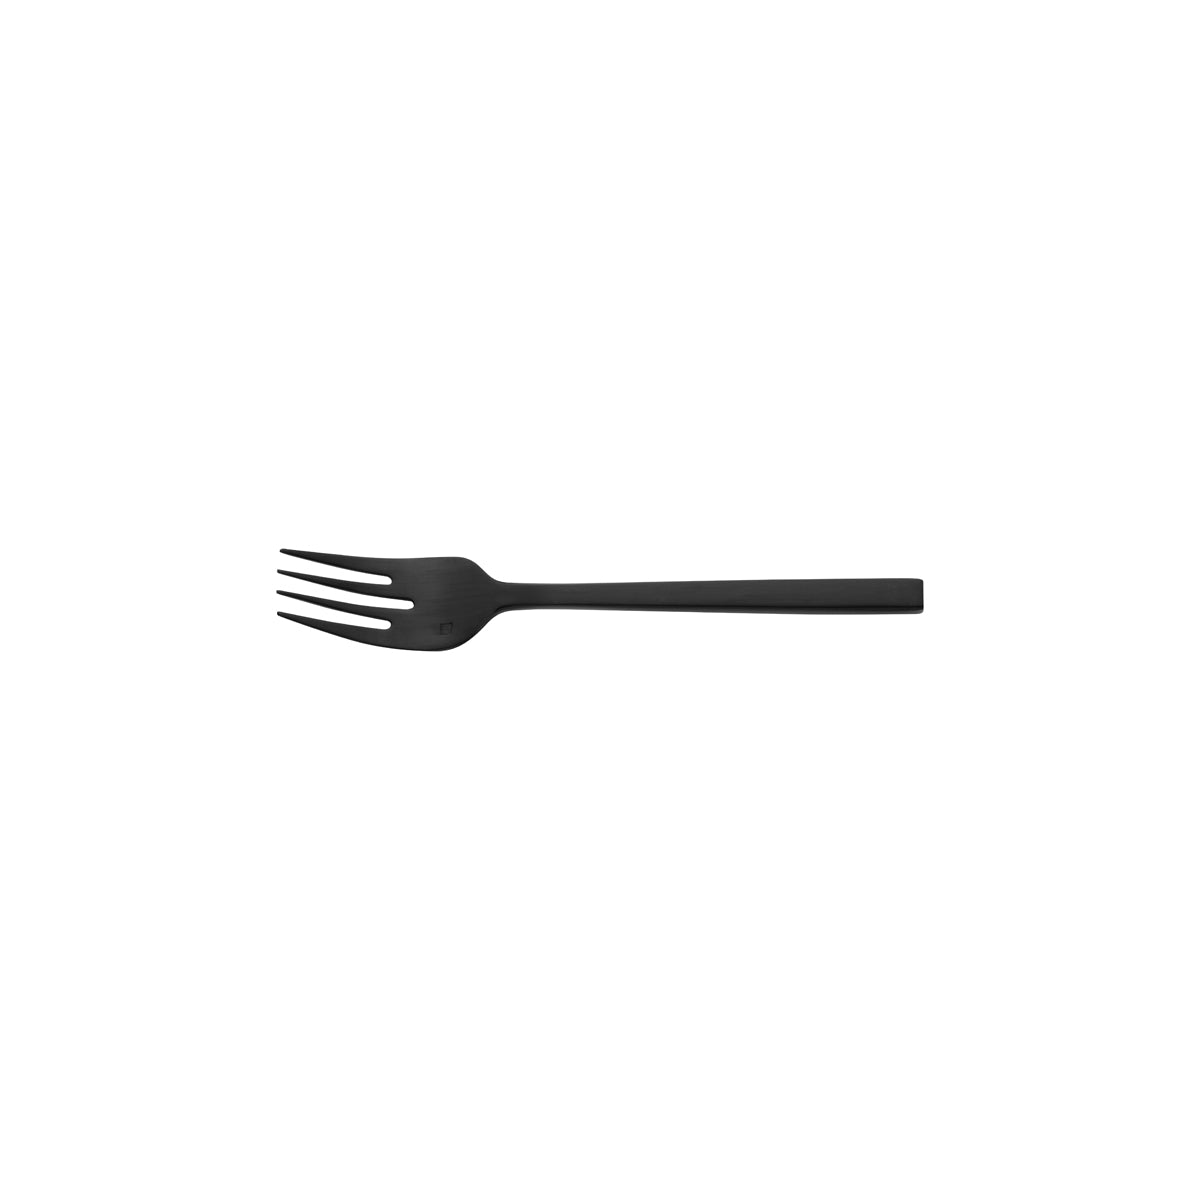 Dessert Fork - Arezzo, Black from Fortessa. made out of Stainless Steel and sold in boxes of 12. Hospitality quality at wholesale price with The Flying Fork! 